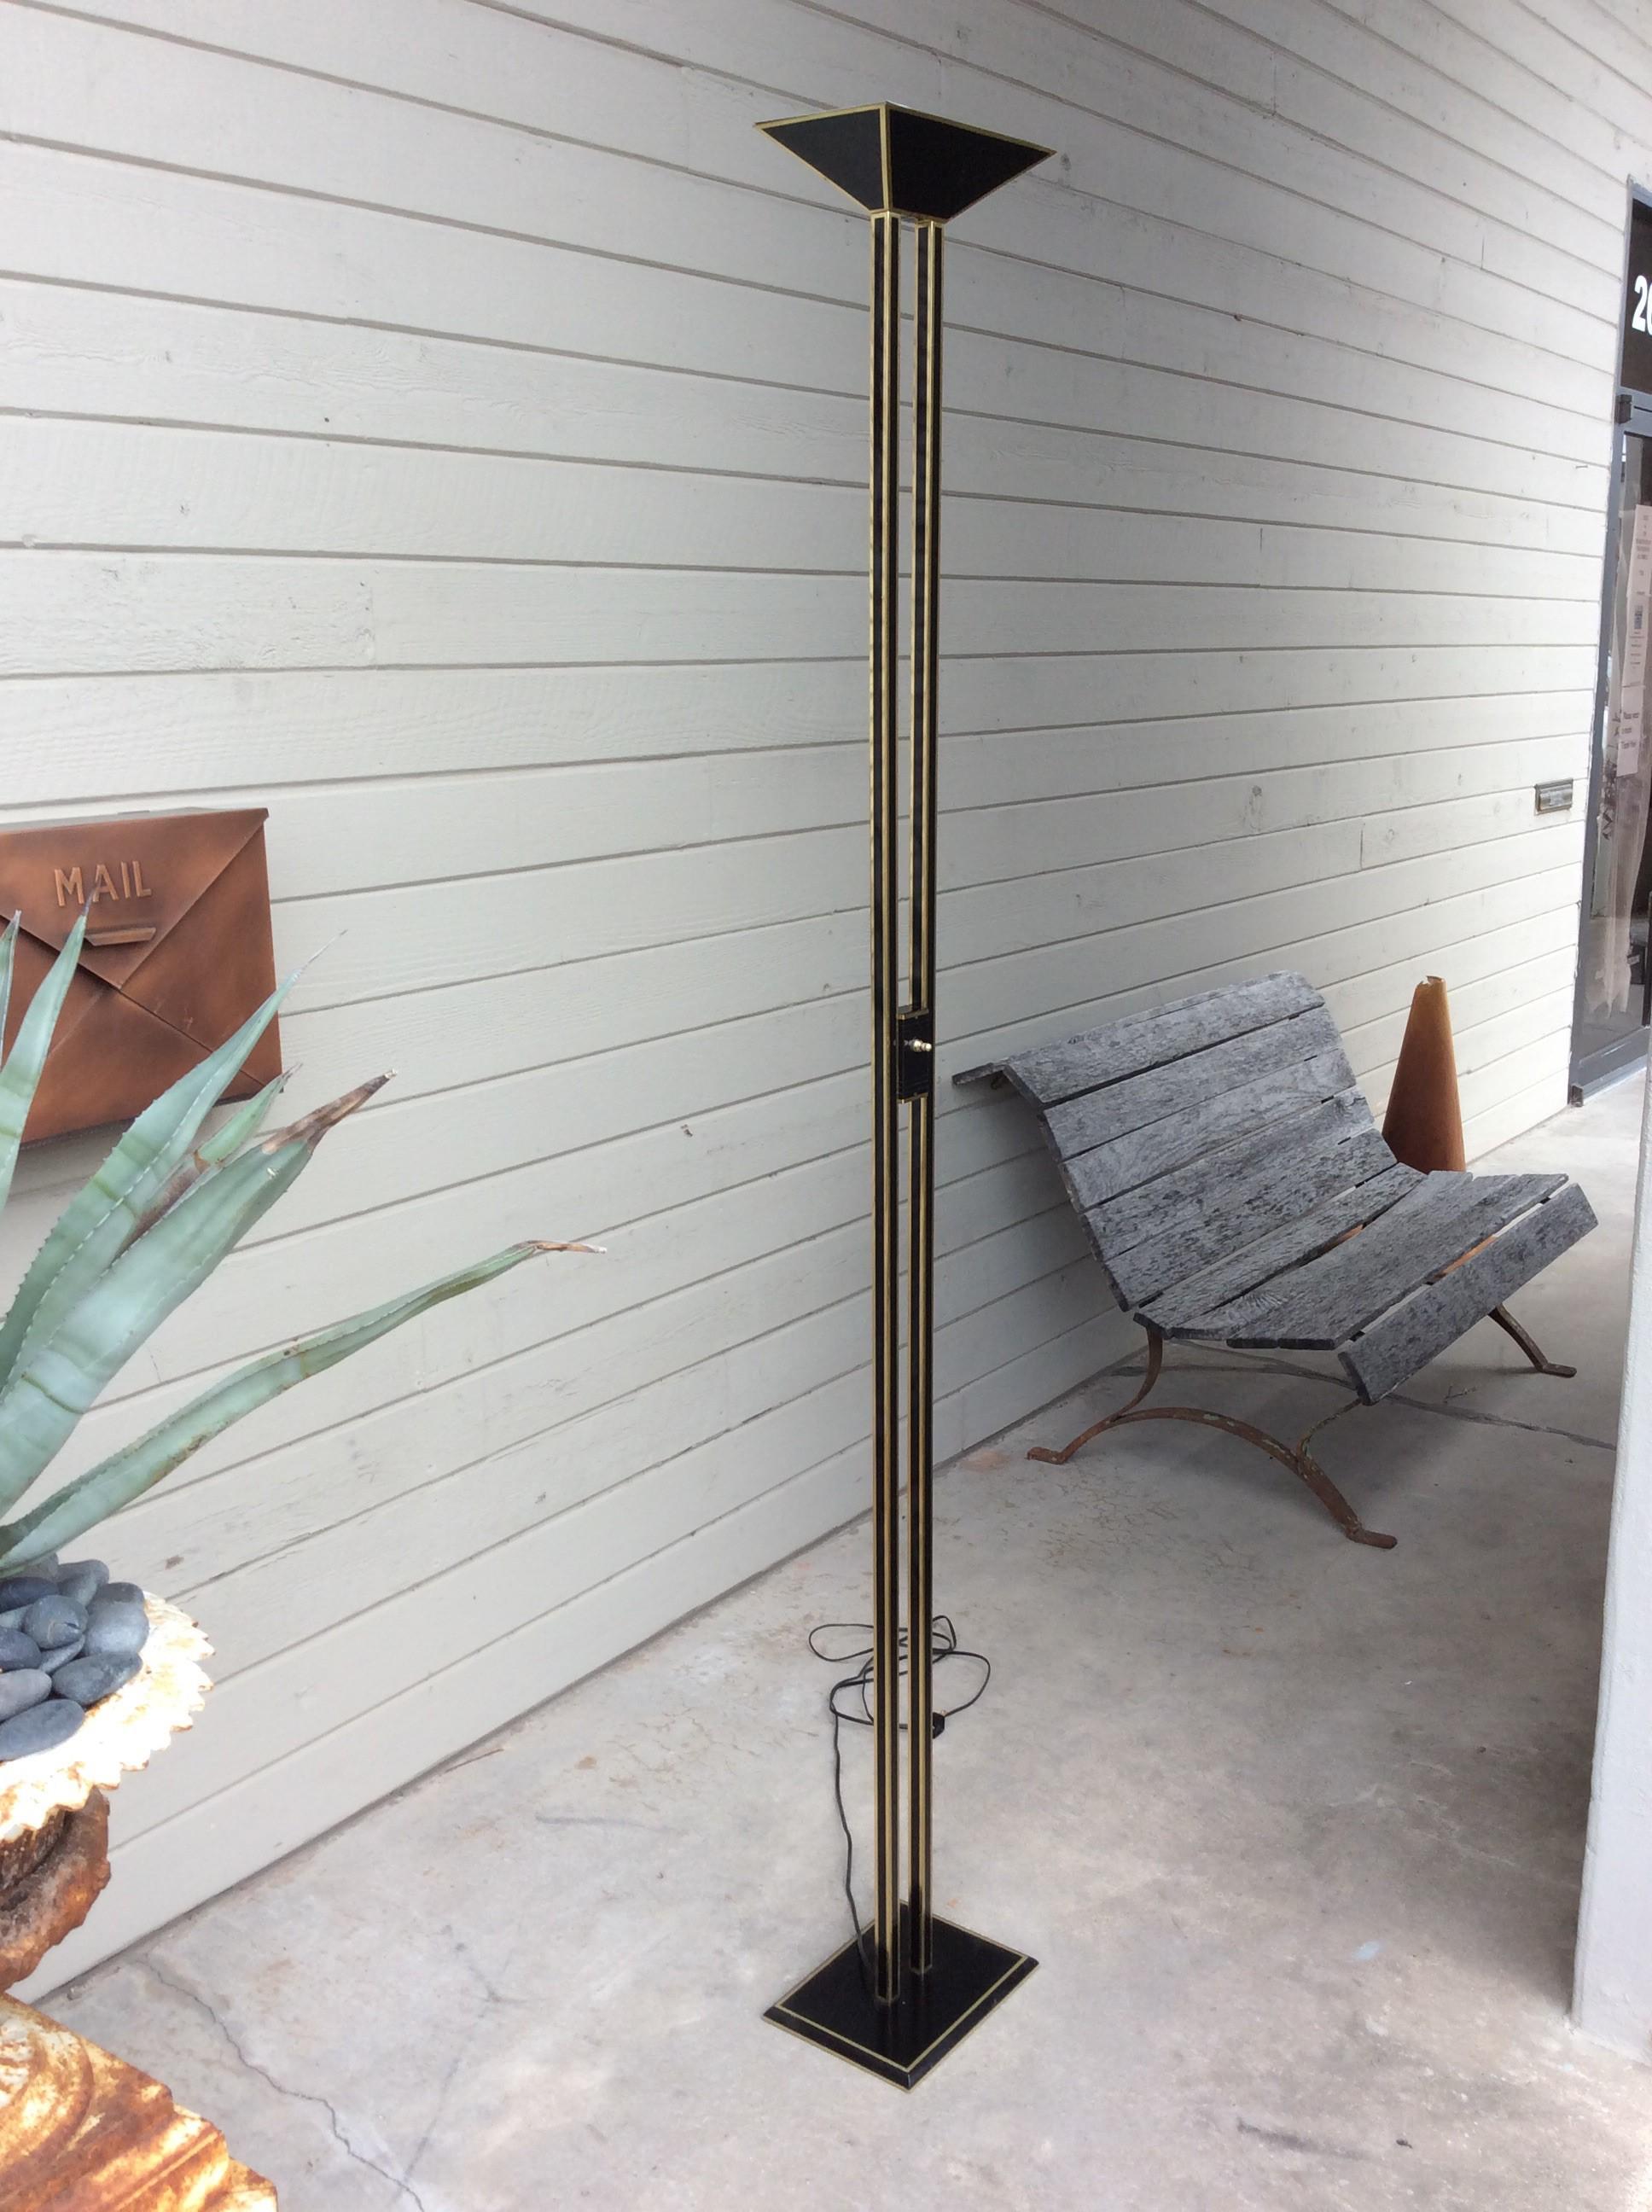 Found in the South of France, this Mid-Century Modern French Halogen Floor Lamp is constructed of metal in black with brass accents. The rectangular uplight rest on two columns that support the on and off switch and is attached at the bottom with a